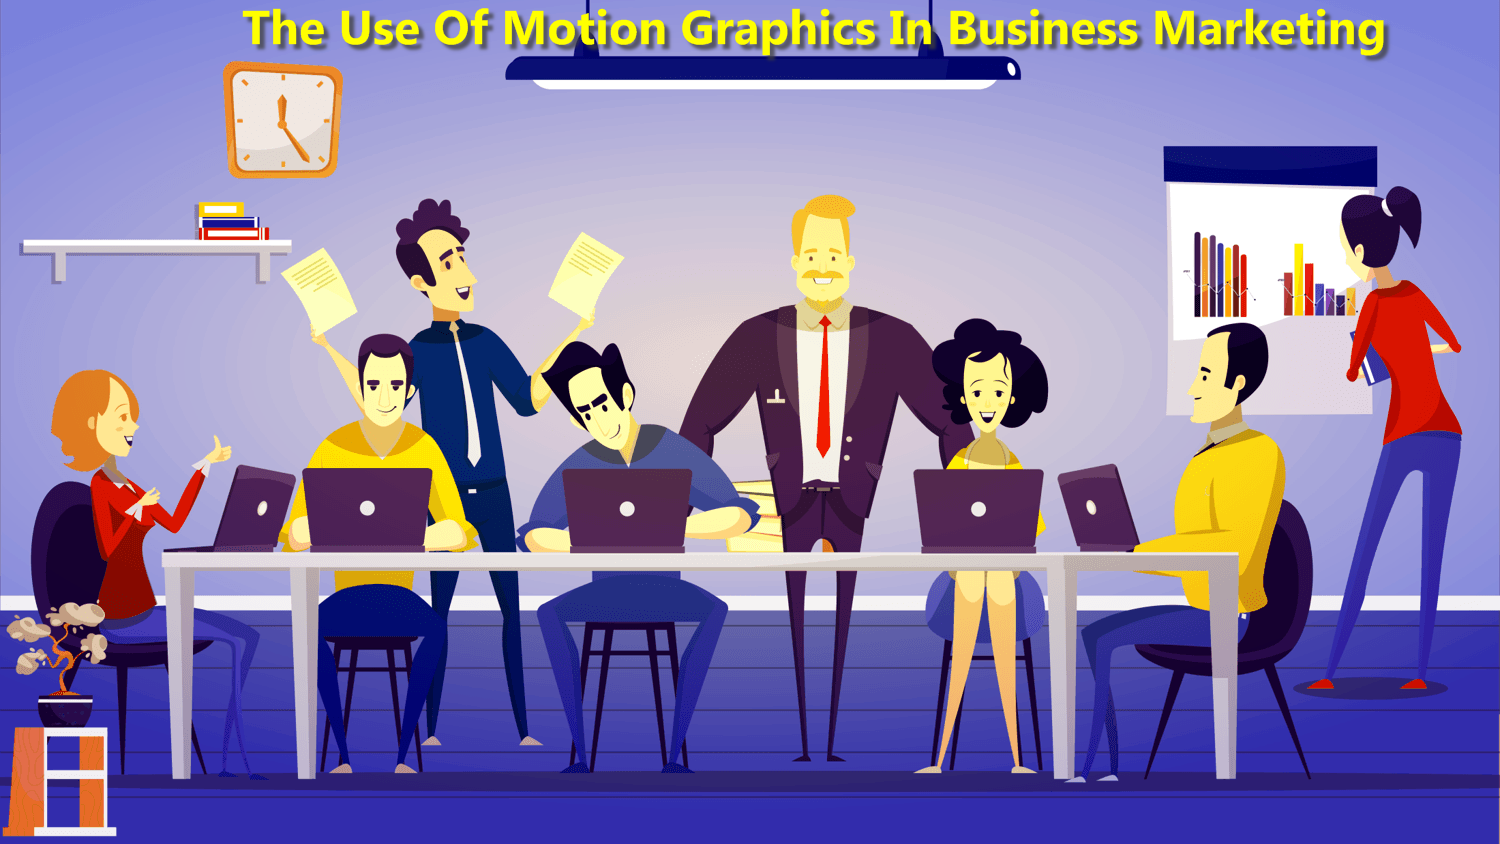 The Use Of Motion Graphics In Business Marketing